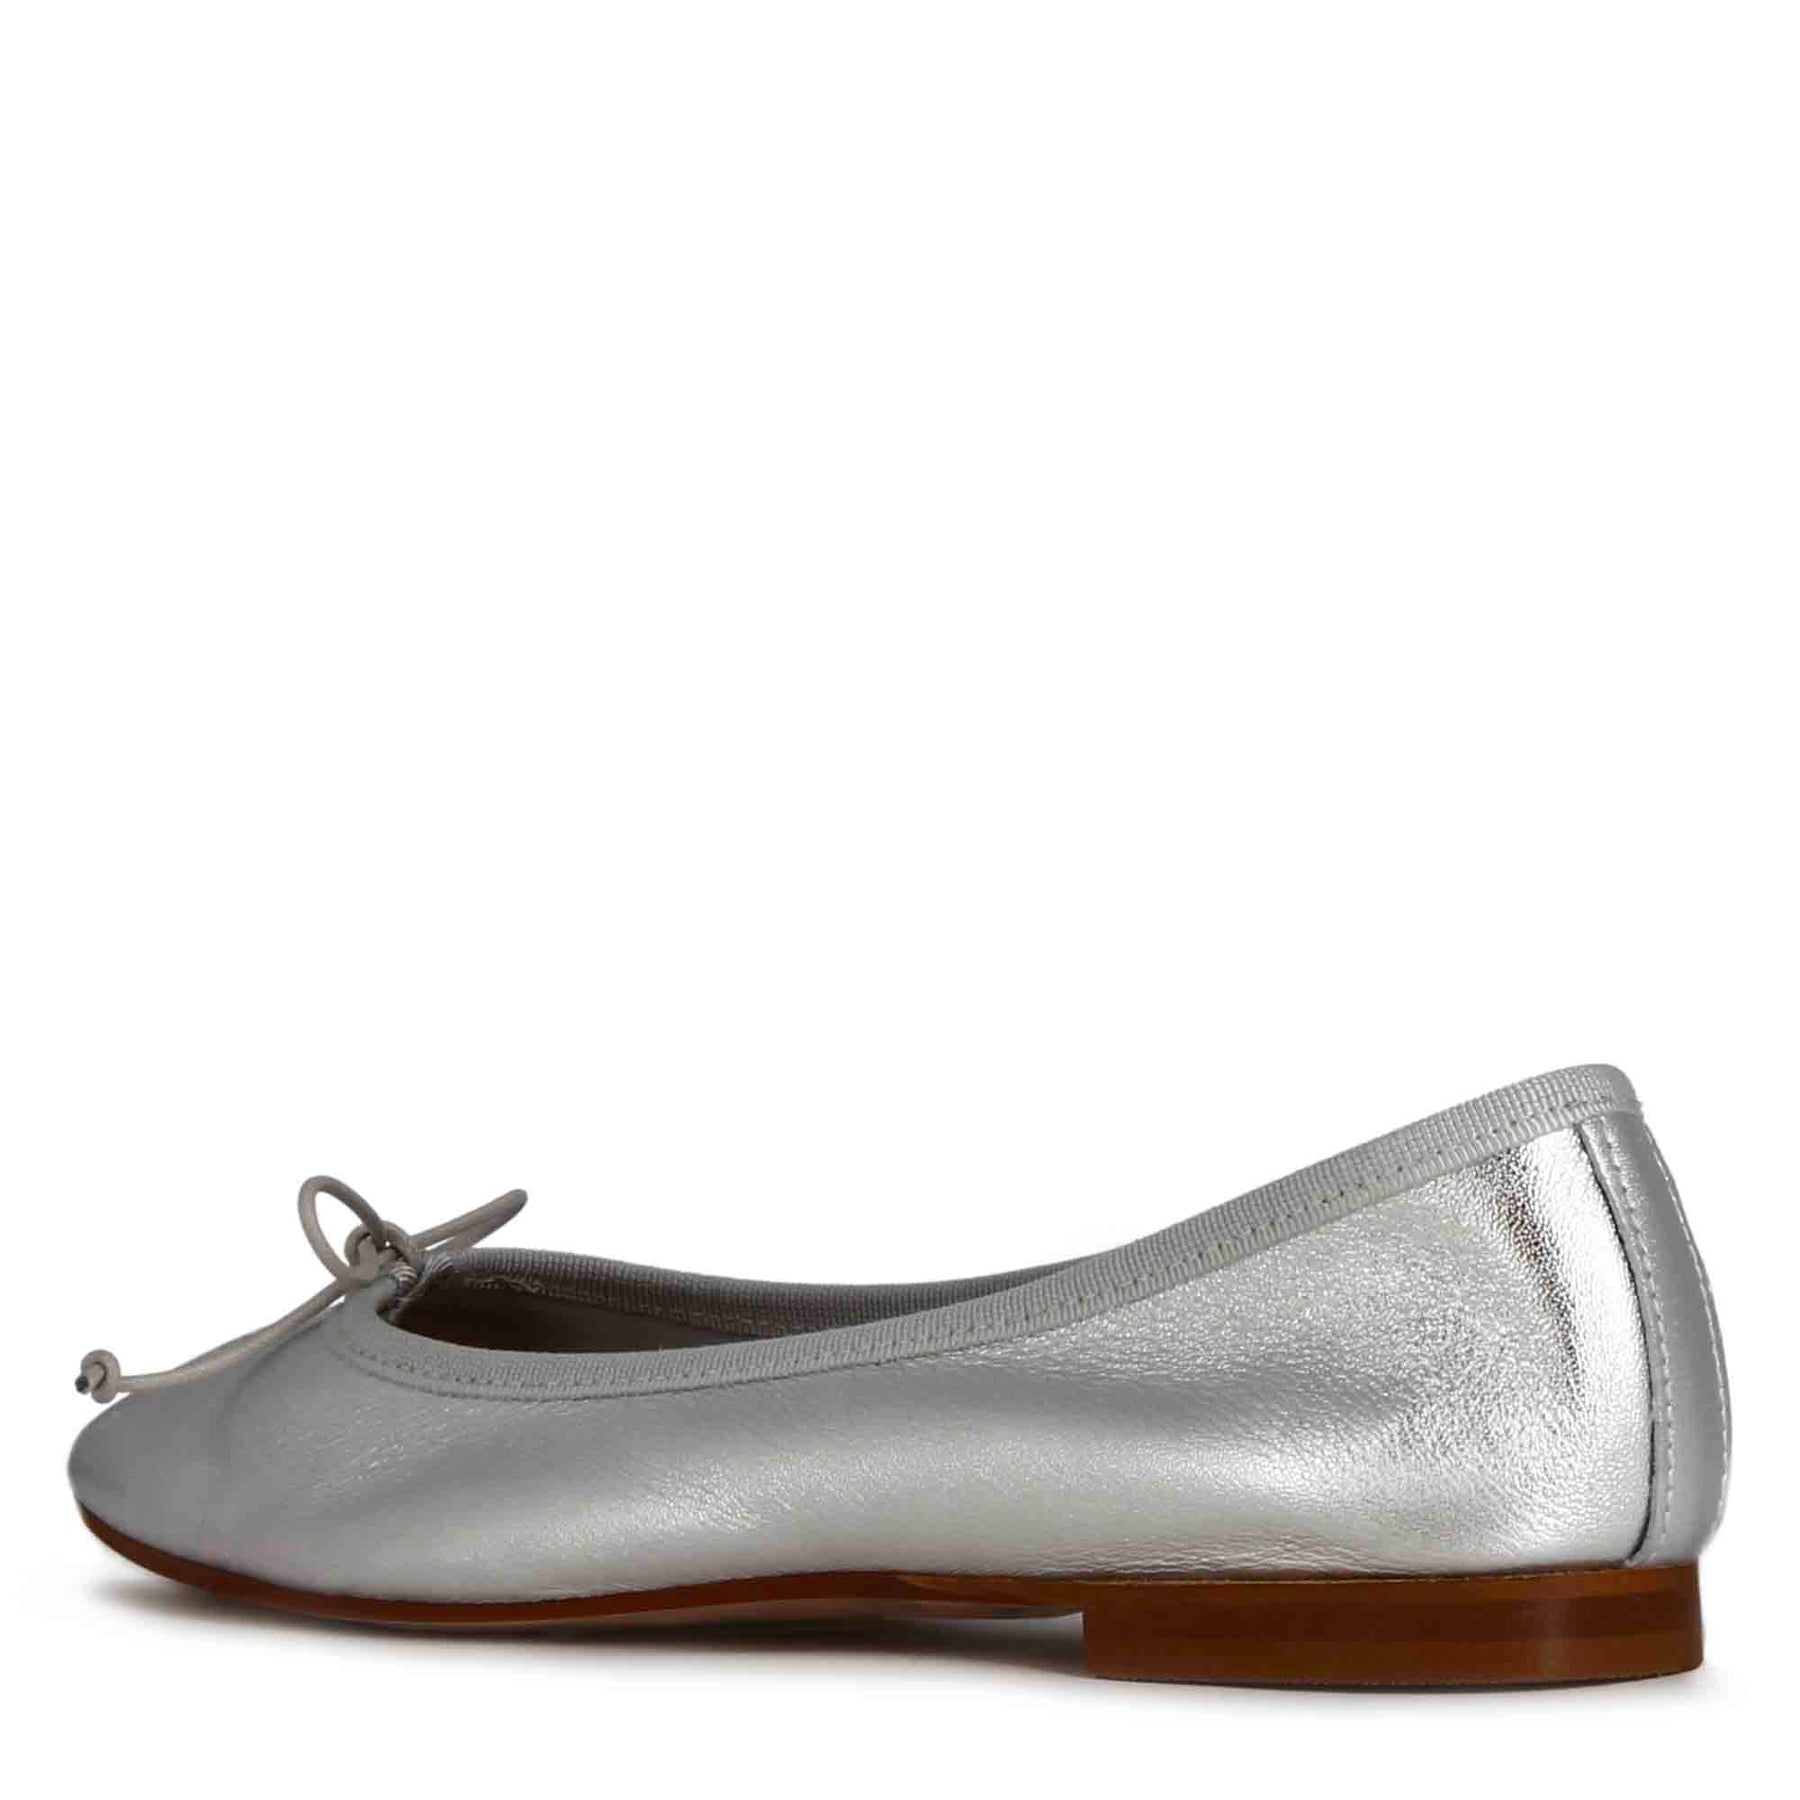 Classic women's ballet flat in silver-coloured laminated leather